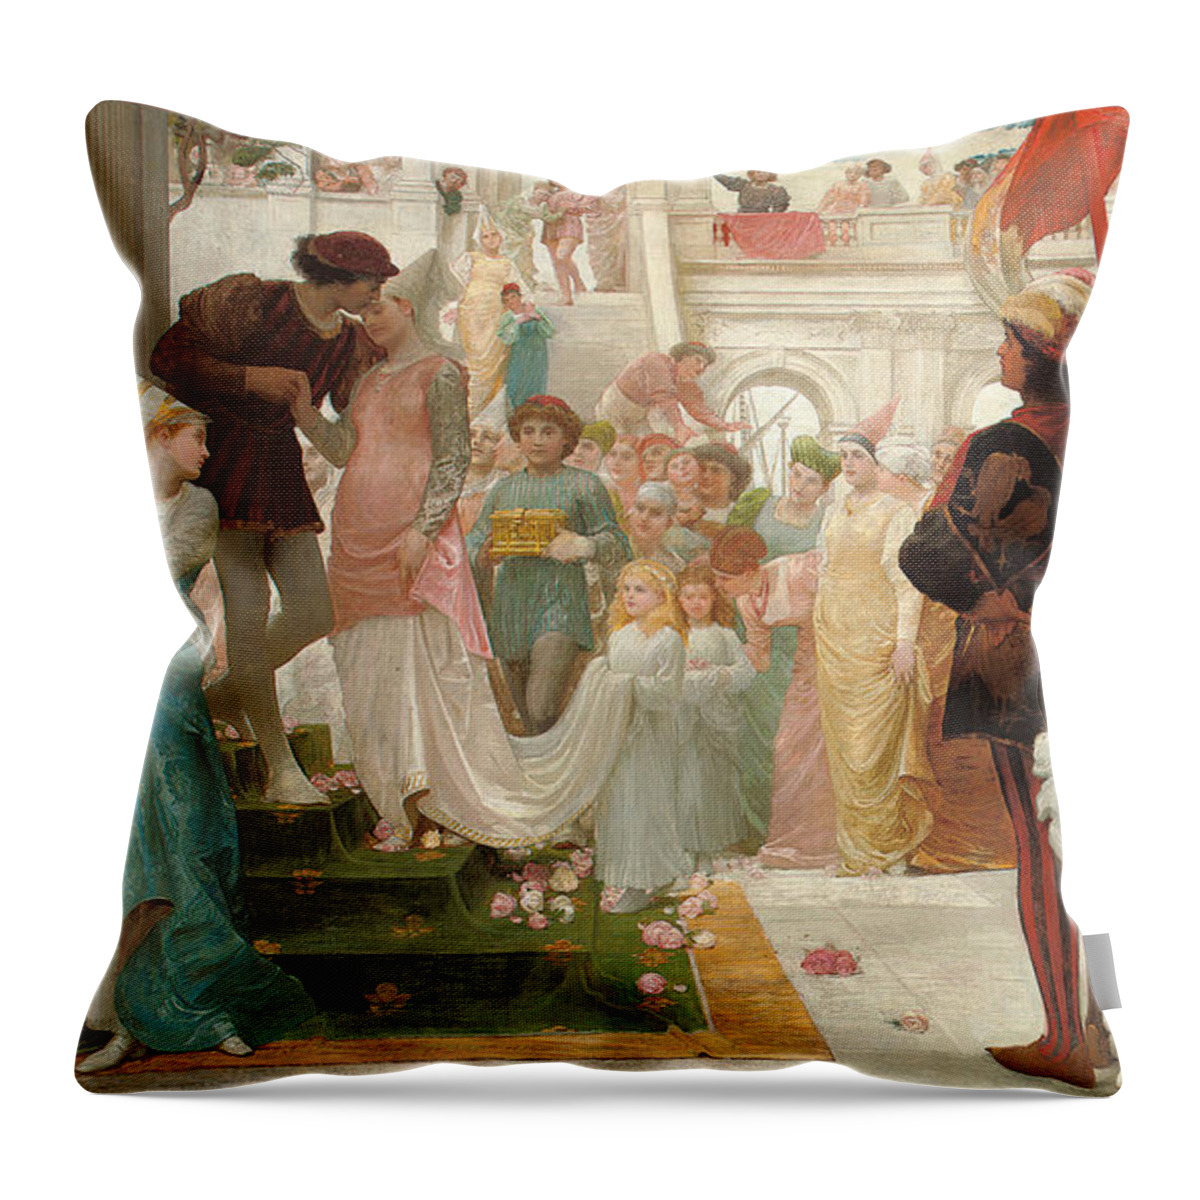 Prince Throw Pillow featuring the painting The Prince's Choice by Thomas Reynolds Lamont